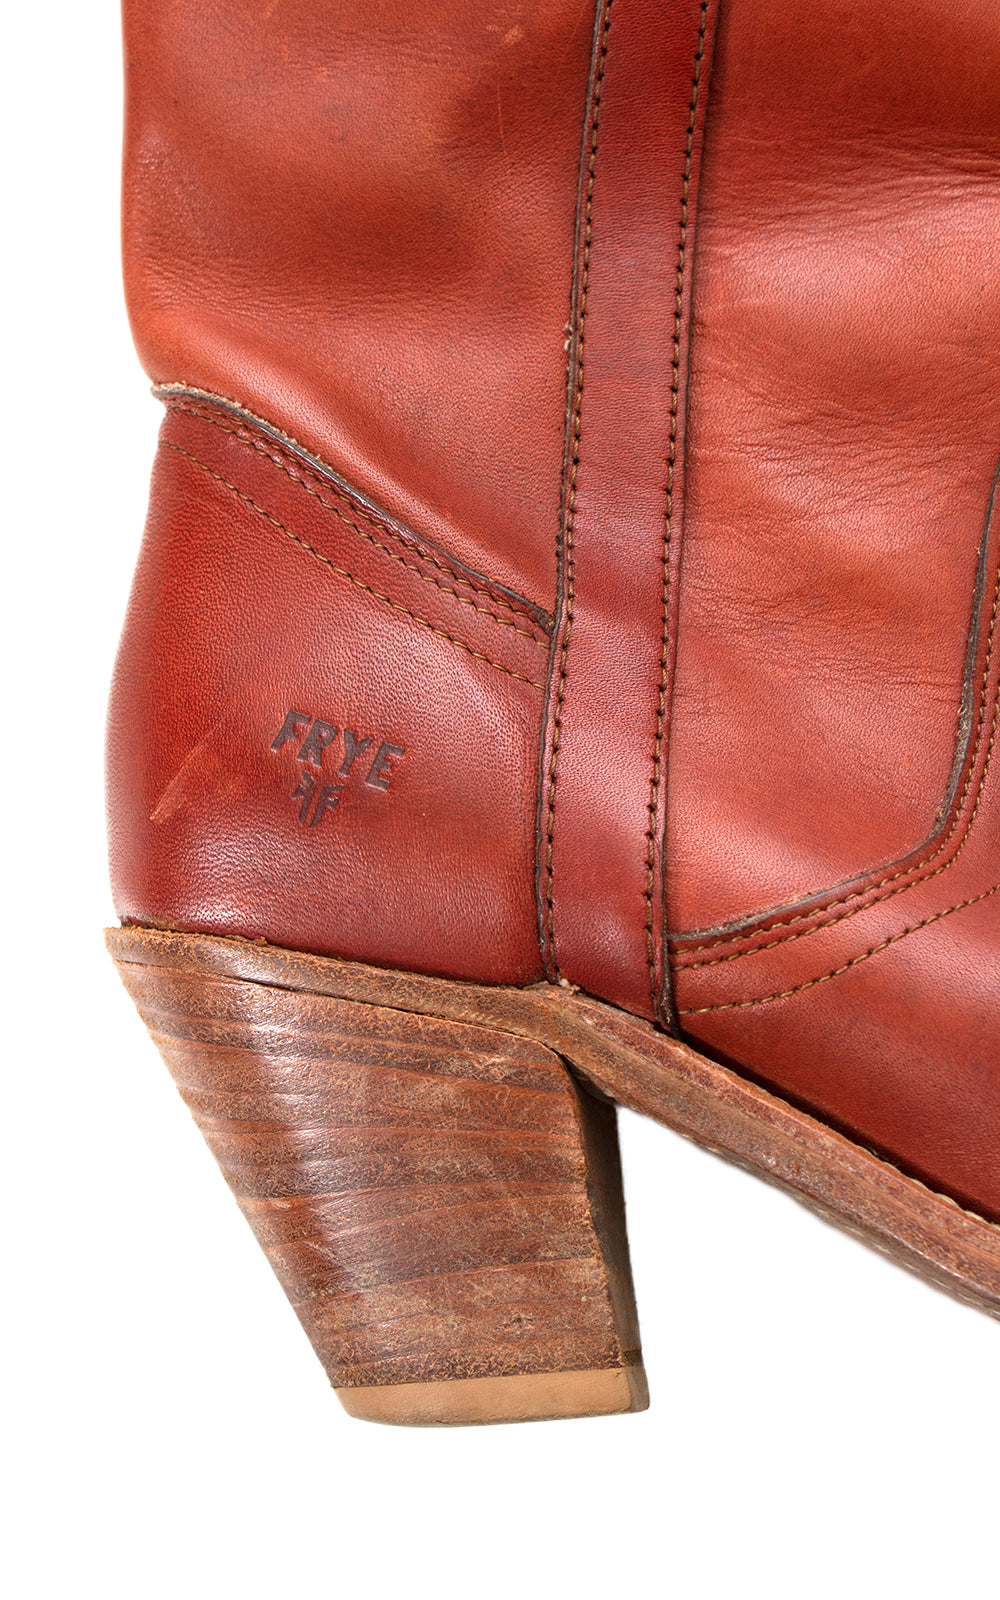 1980s 1990s FRYE Leather Campus Boots | US 7.5